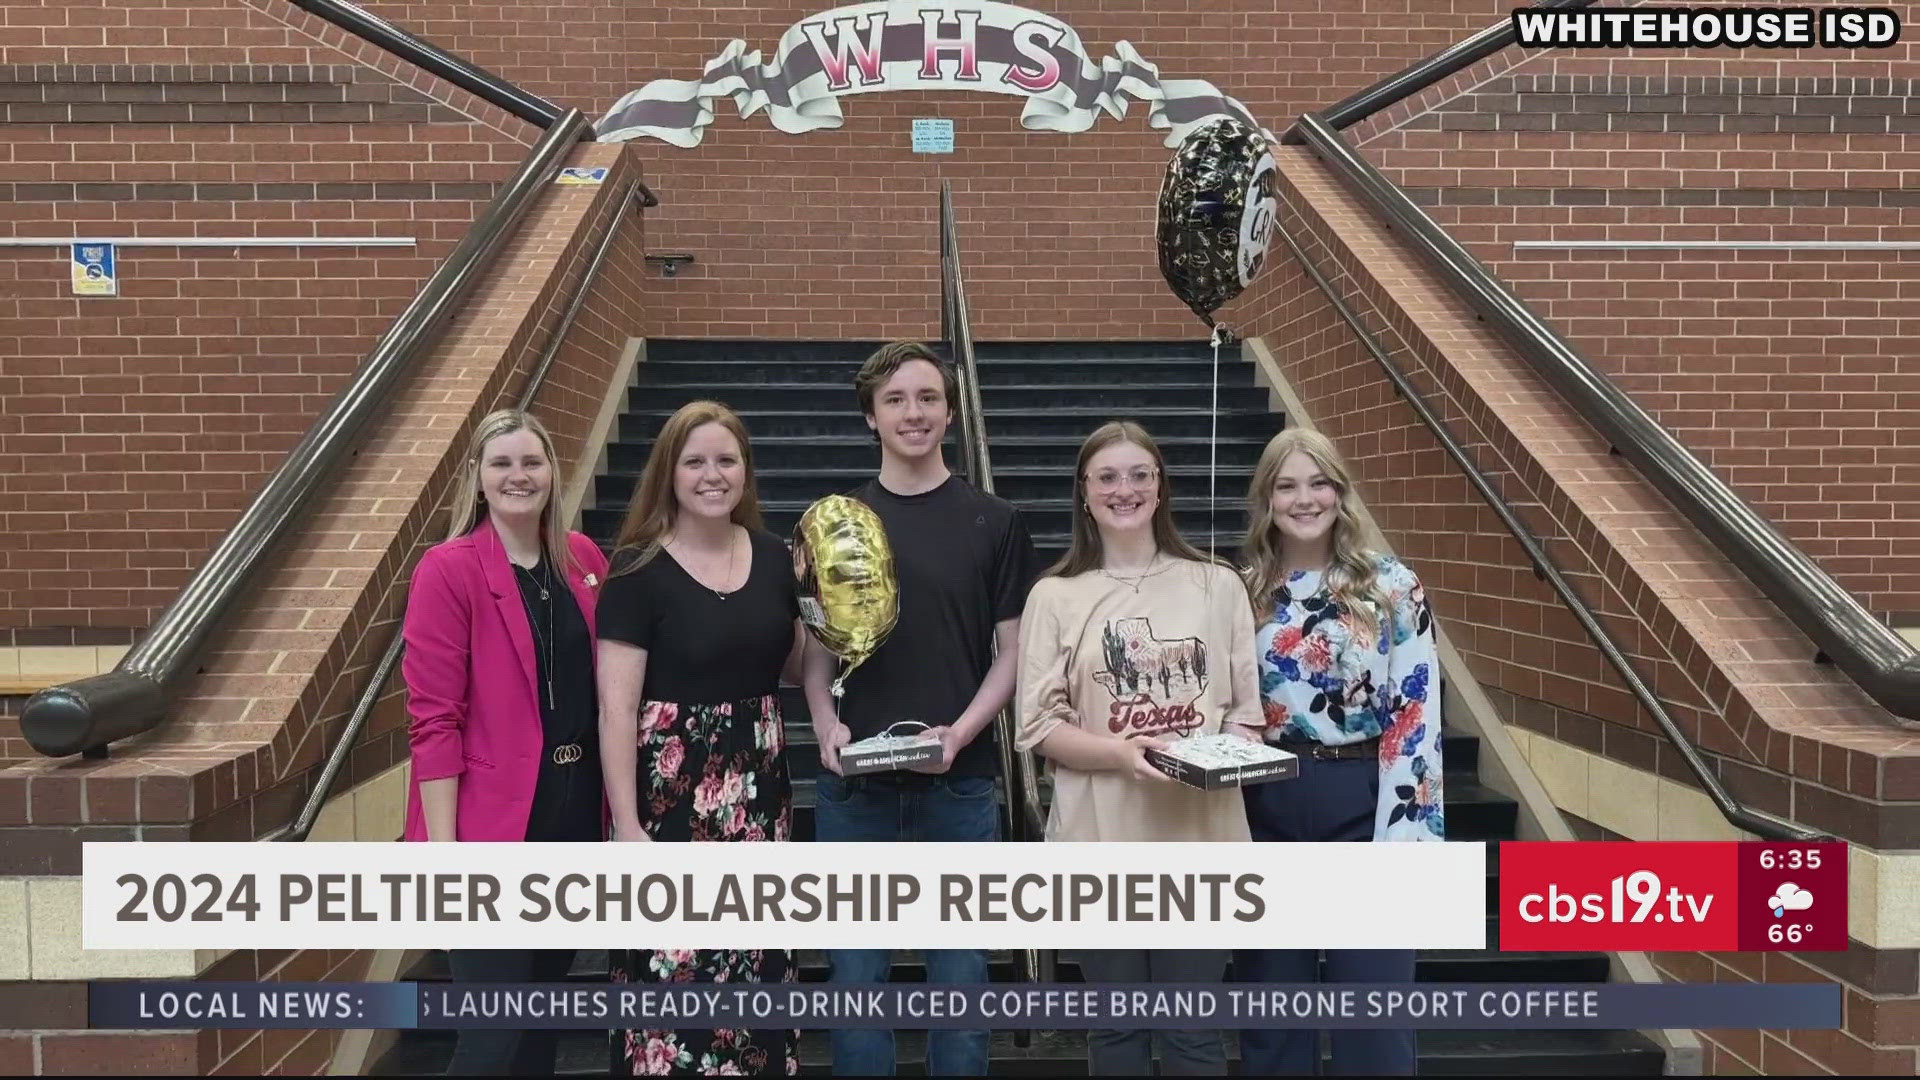 Over the past 12 years, the Peltier Automotive Group has handed out more than 600 scholarships totaling $600,000.